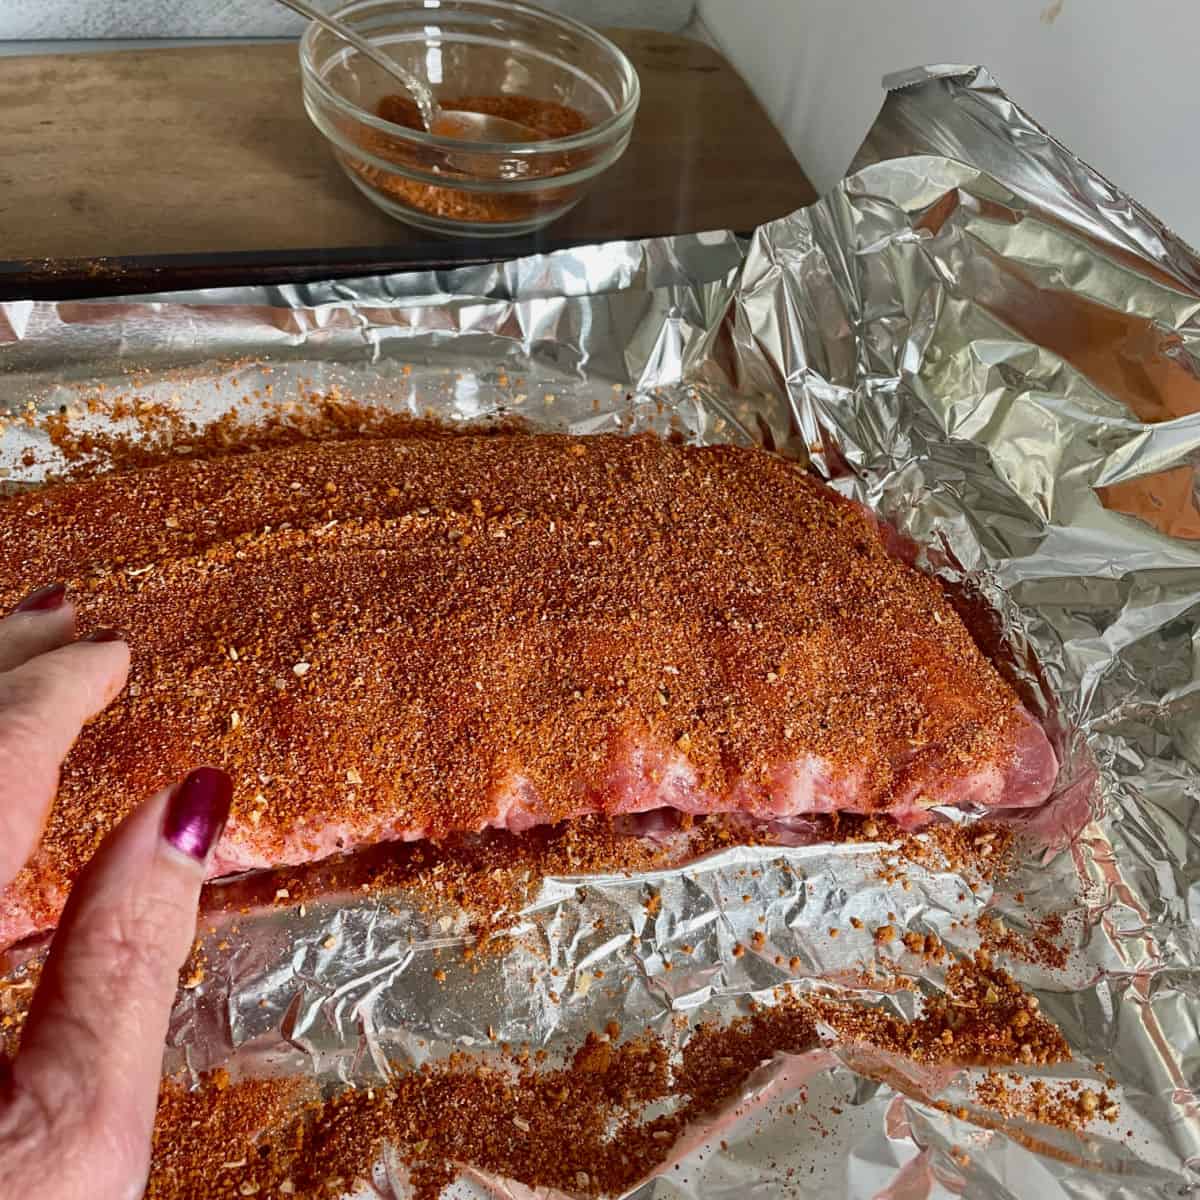 Ribs being rubbed with seasoning mix.